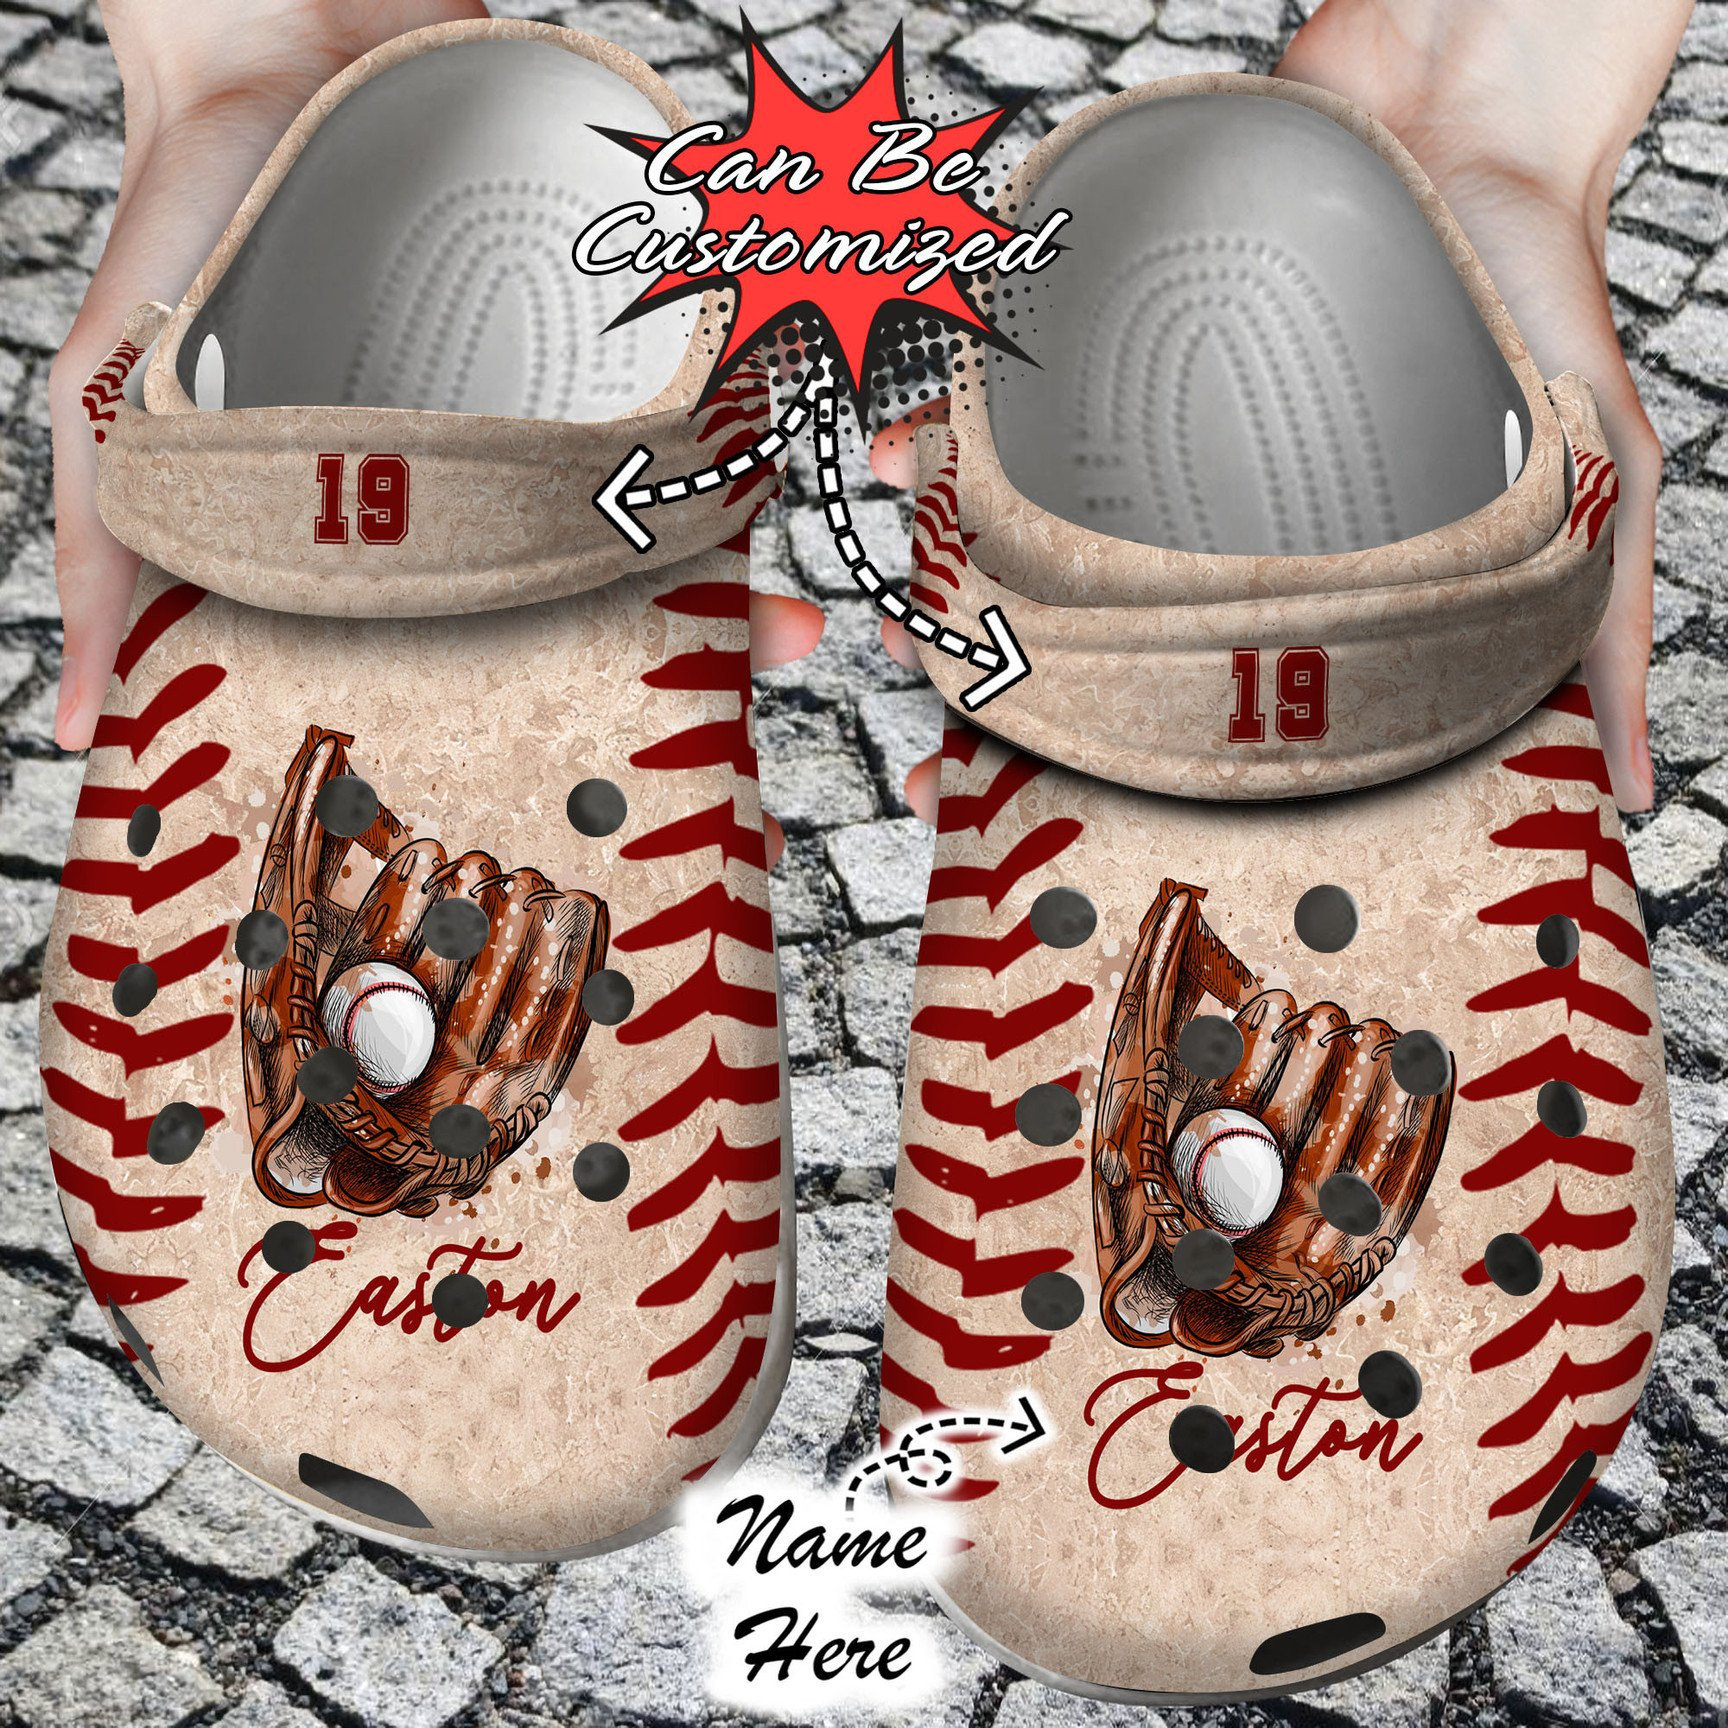 Personalized Baseball Glove With Ball Crocs Clog Shoes Sport Crocs ...